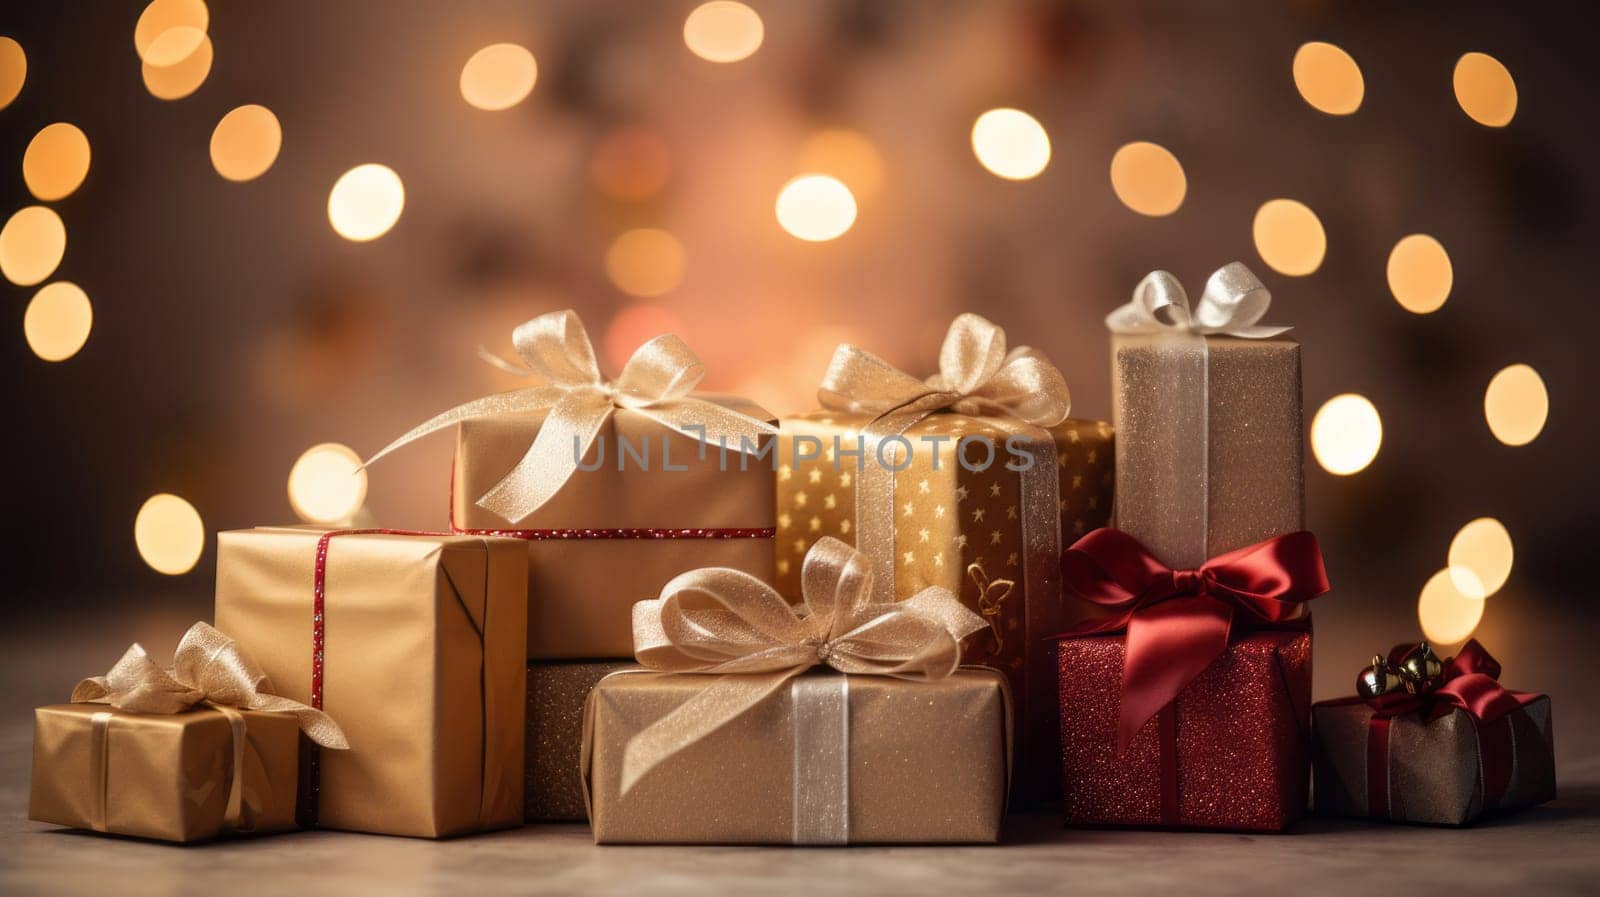 A pile of wrapped Christmas presents with ribbons and bows, with a blurred background of Christmas lights. The concept is Christmas and gift giving. by DogDrawHand